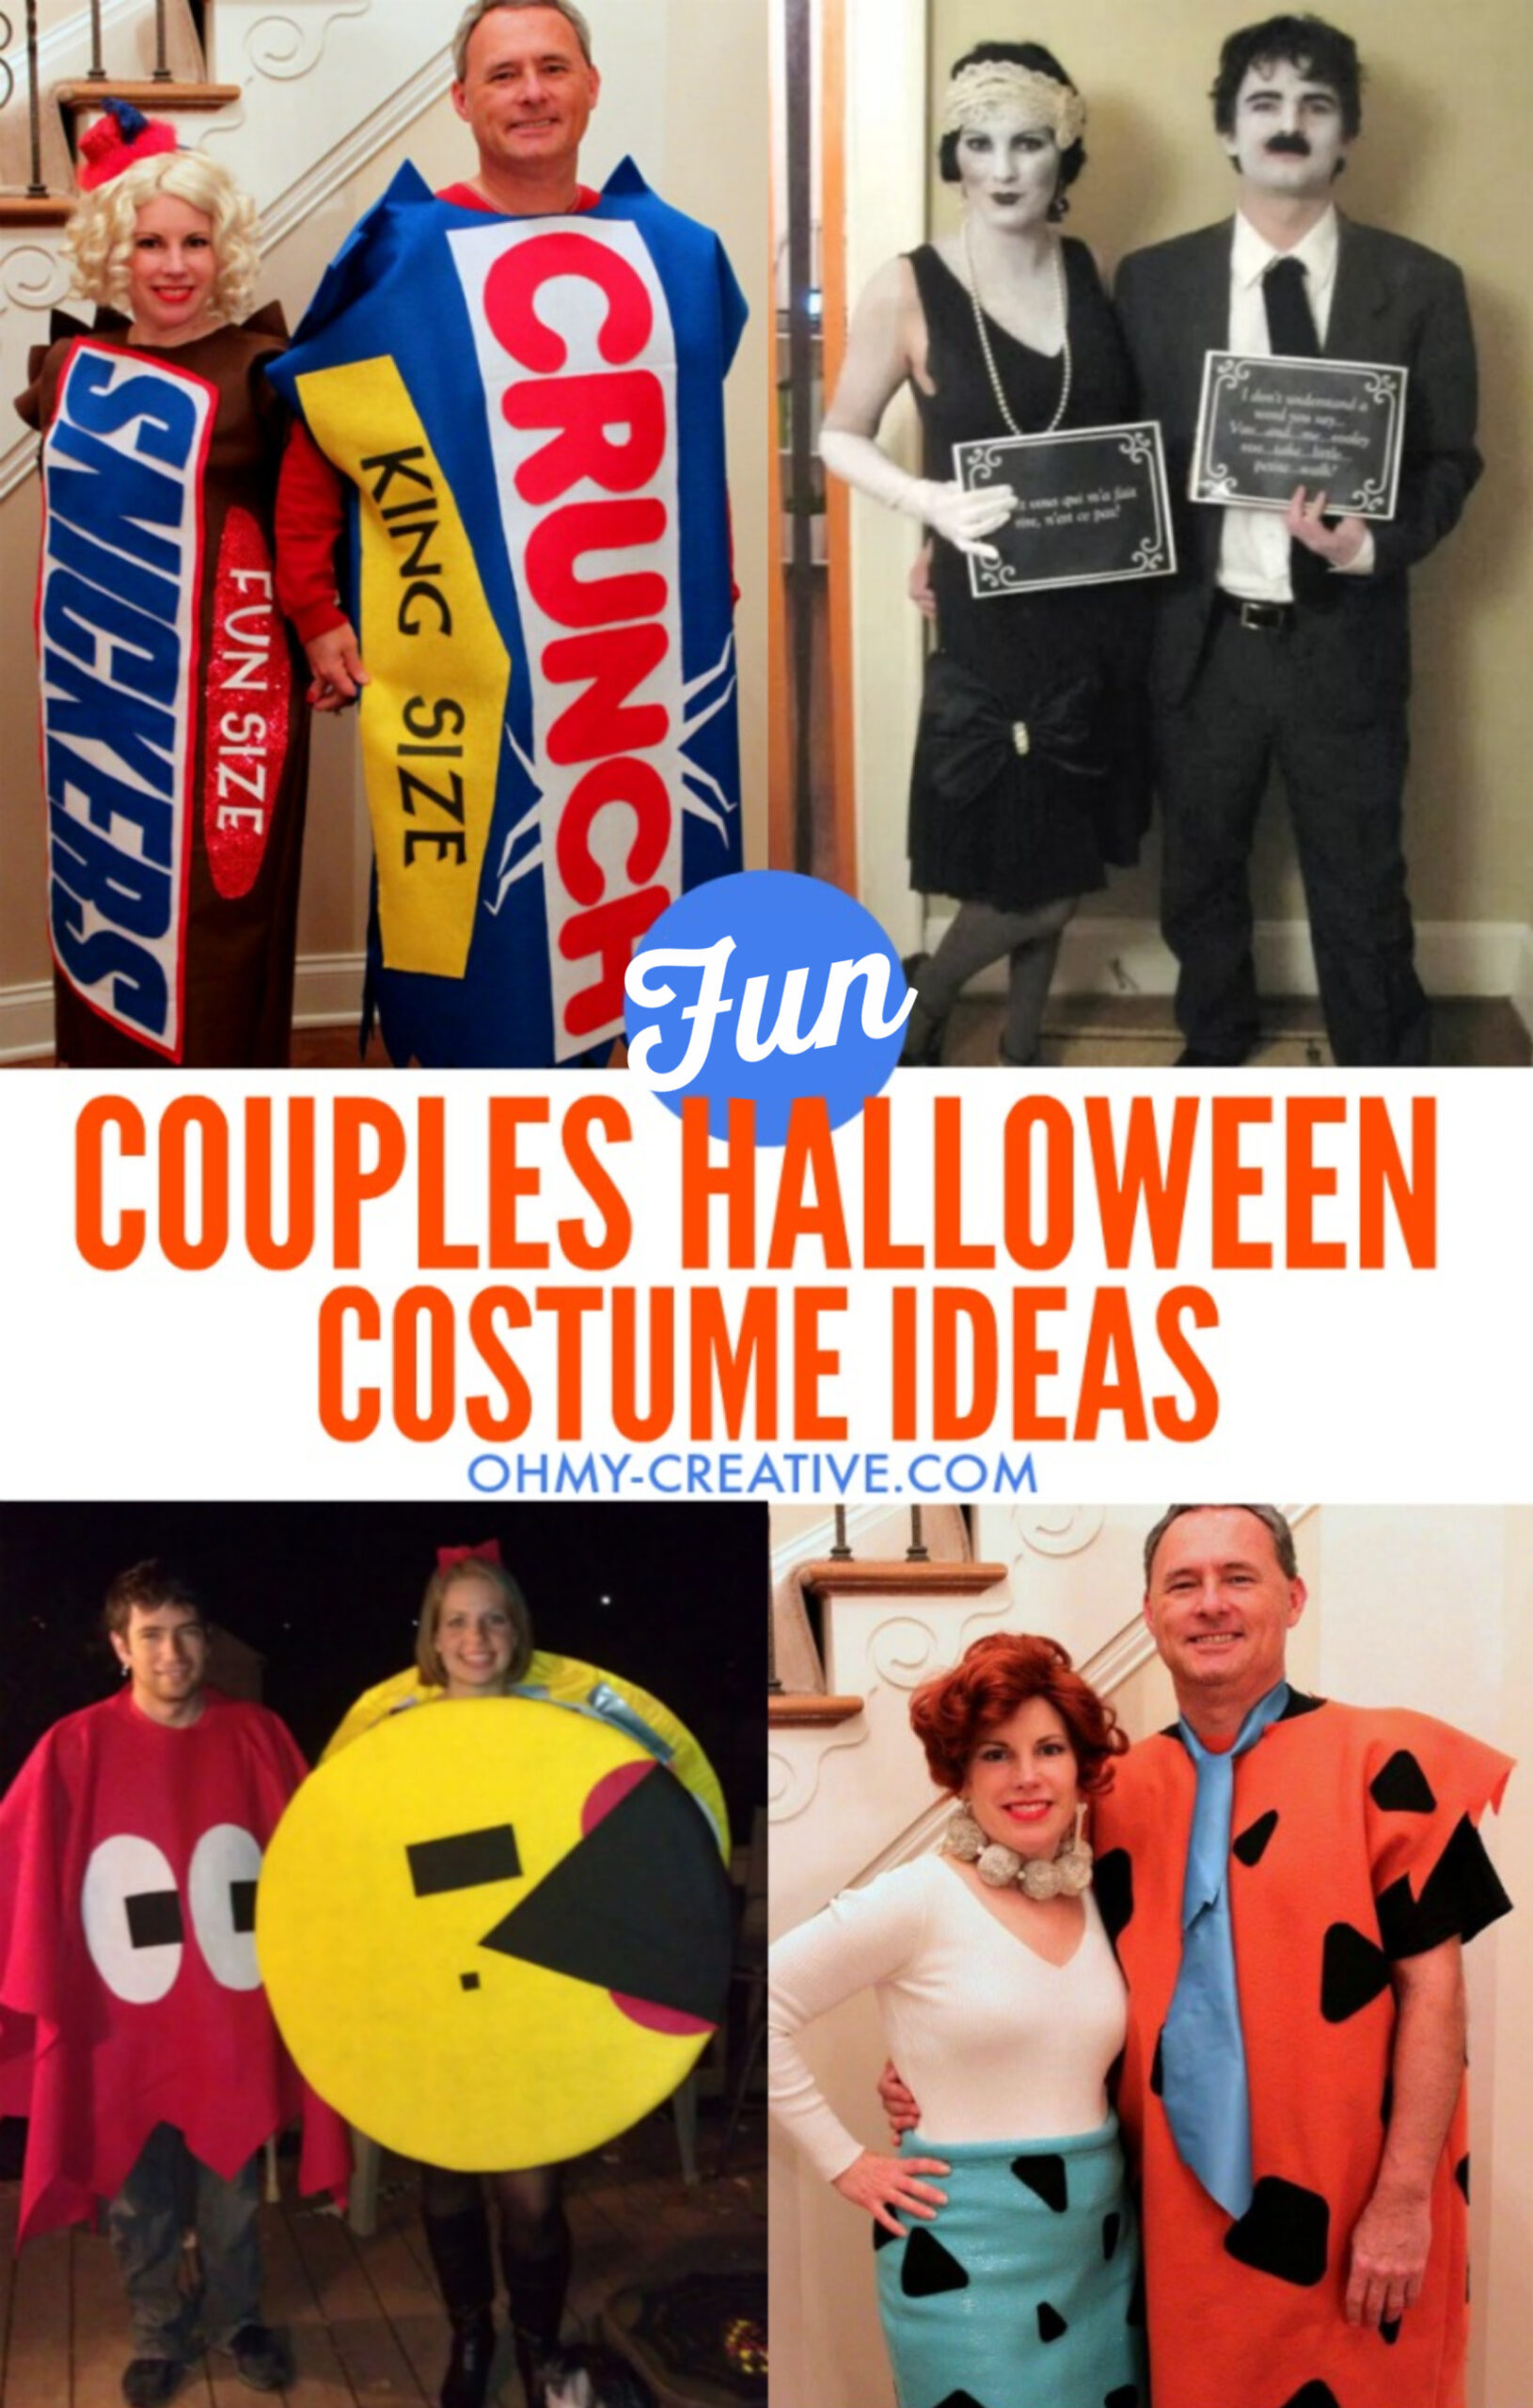 Try one of these Couples Halloween Costume Ideas this Halloween!